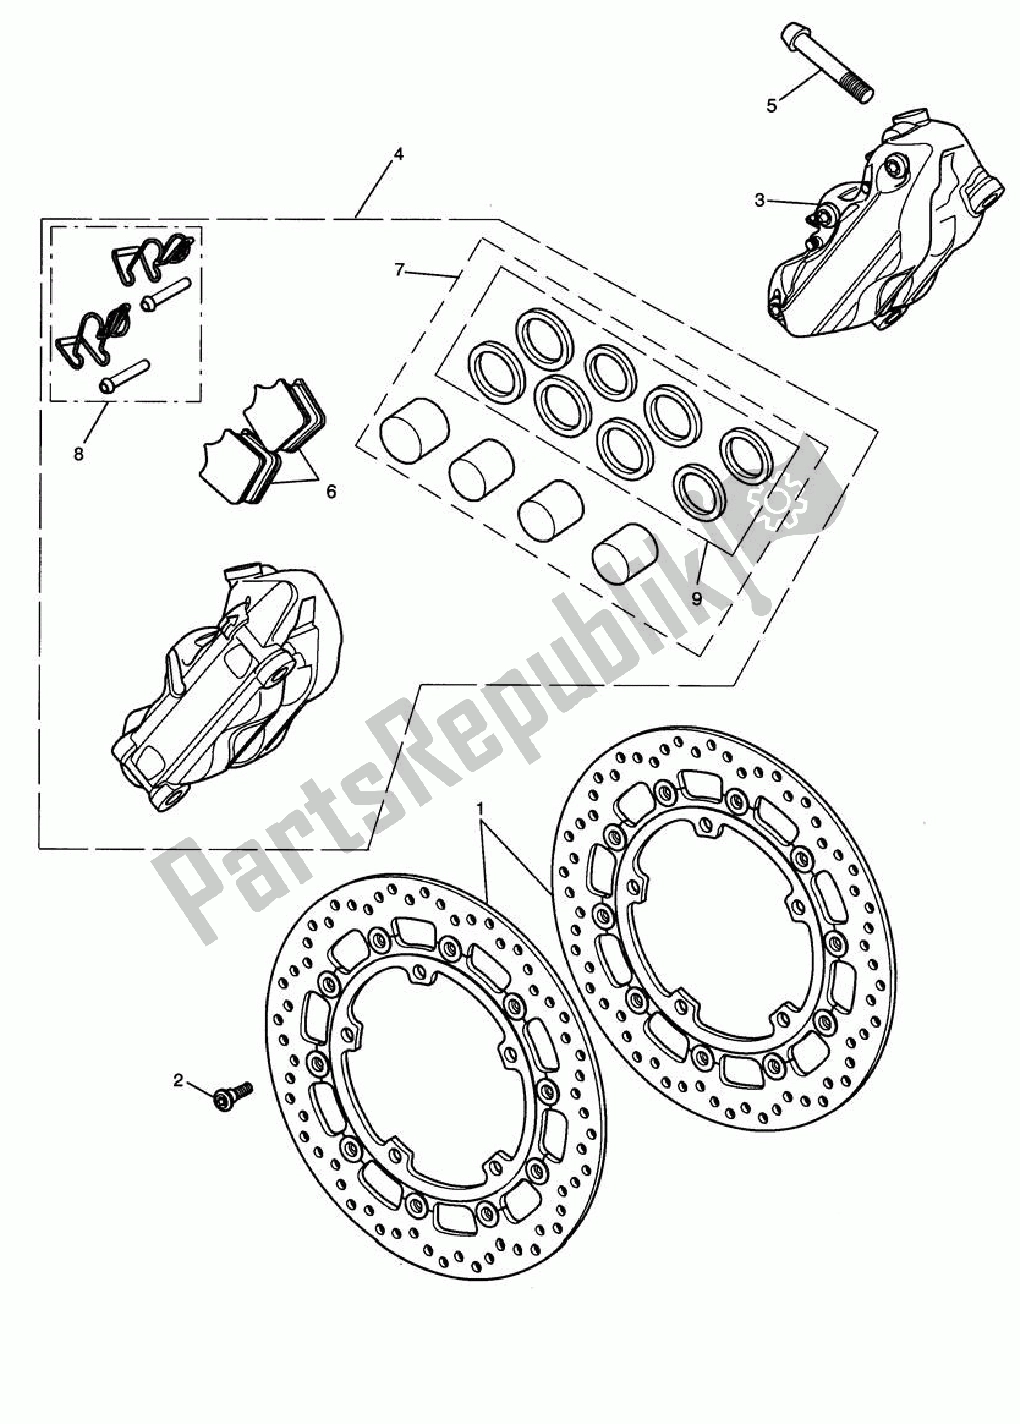 All parts for the Front Brake Caliper & Discs - 333179 > of the Triumph Speed Triple 1050 2008 - 2012